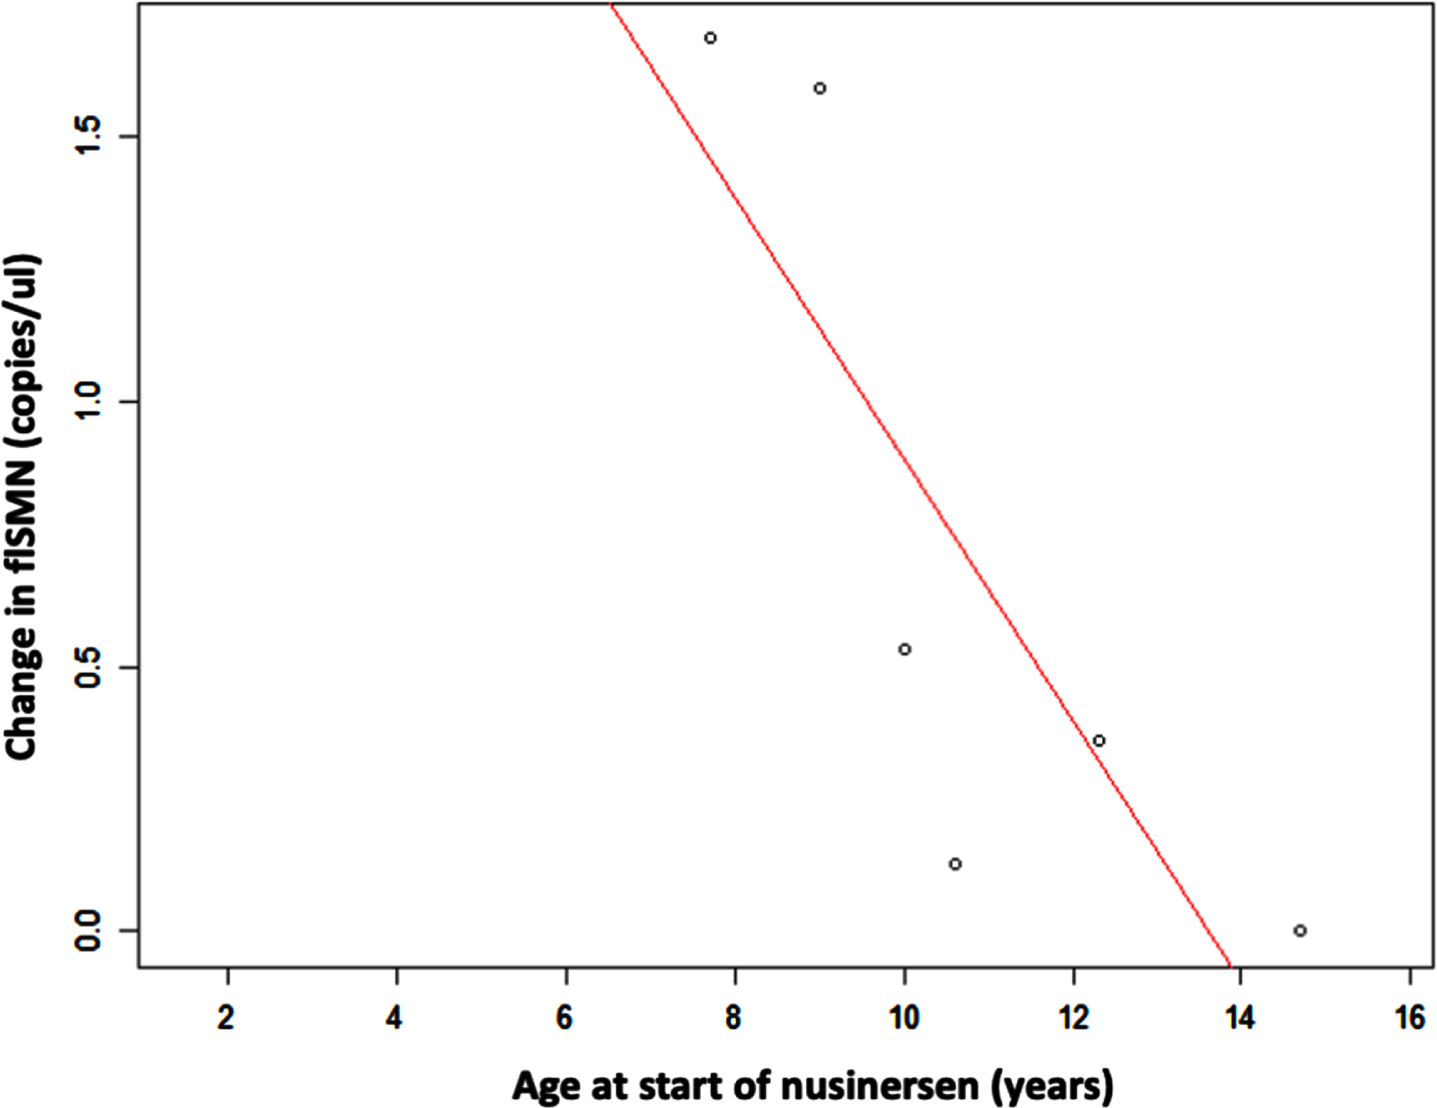 Scatter plot shows the relationship between age and increase in flSMN transcript expression in serum EVs after nusinersen treatment. Increase in flSMN is significantly higher in individuals who were younger at first administration of nusinersen.